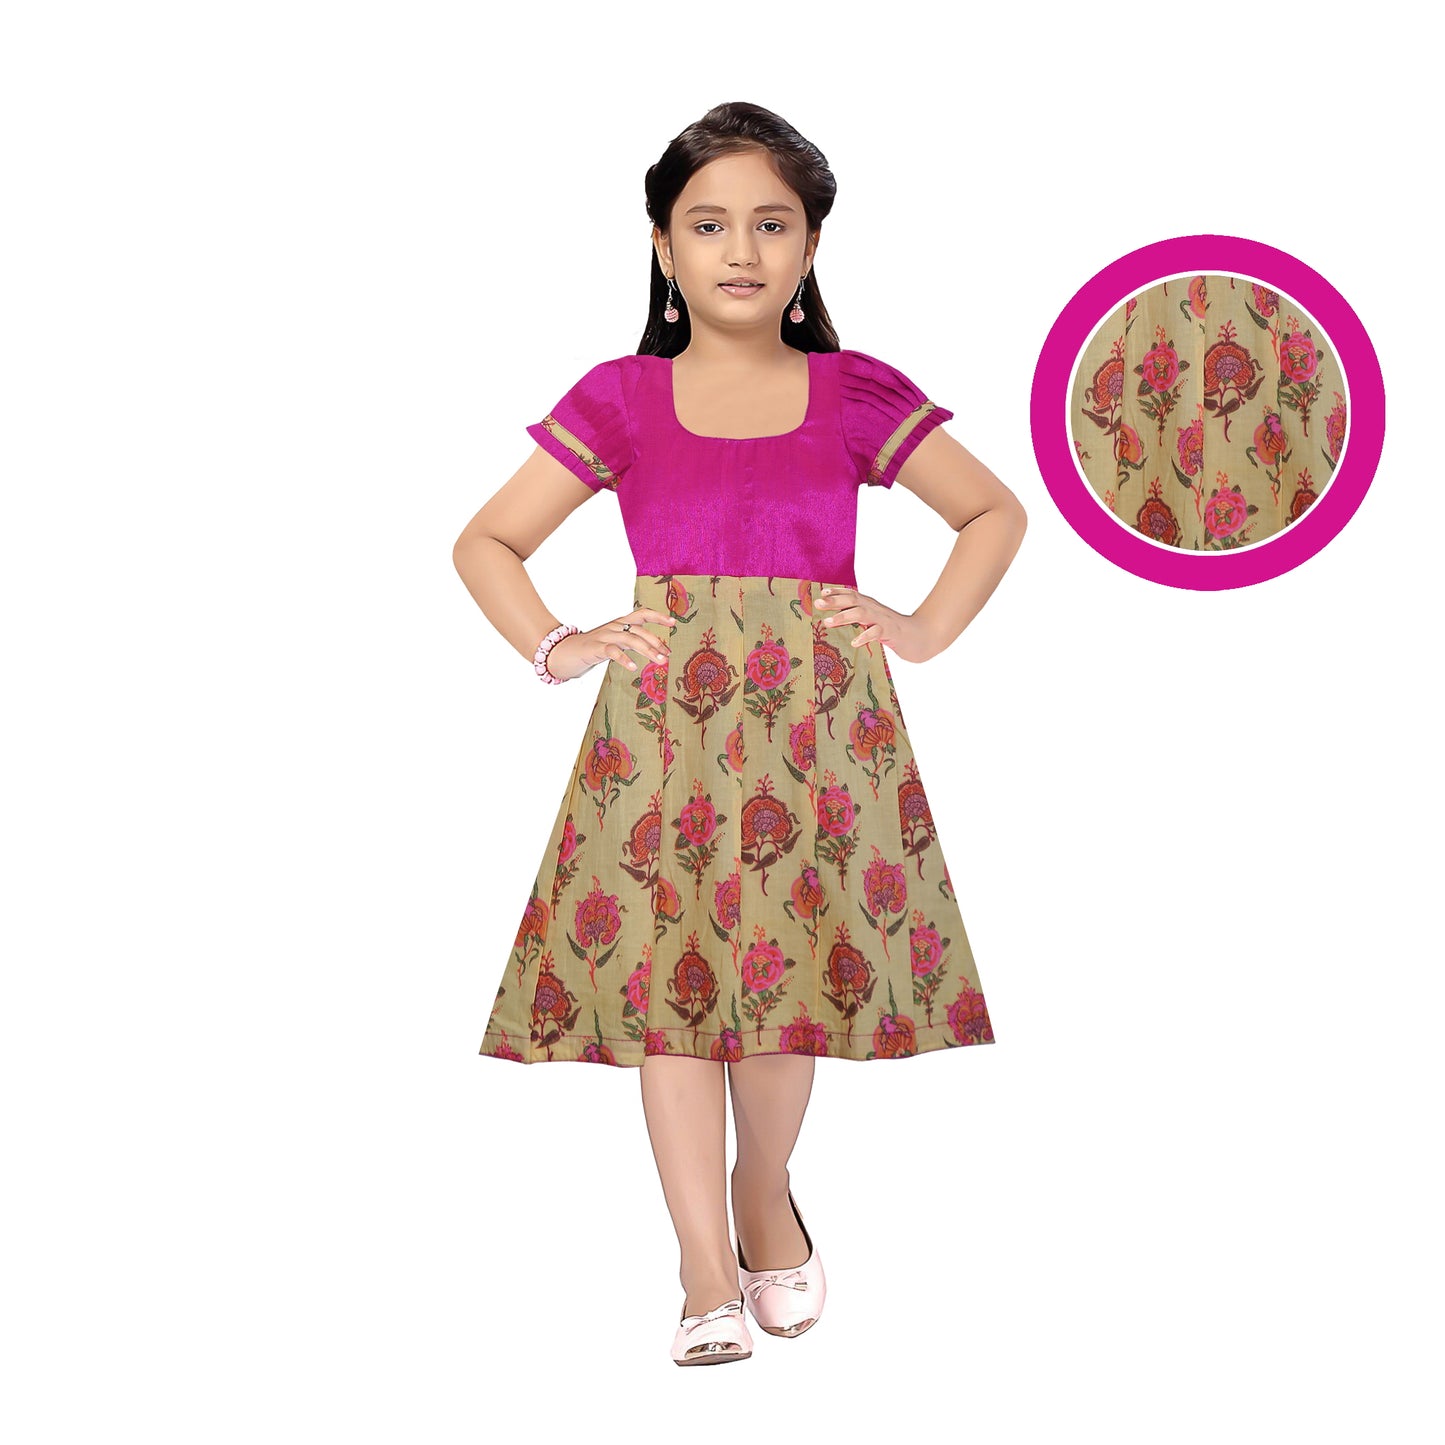 Look Gorgeous in this Beautiful Hot pink with yellow frock